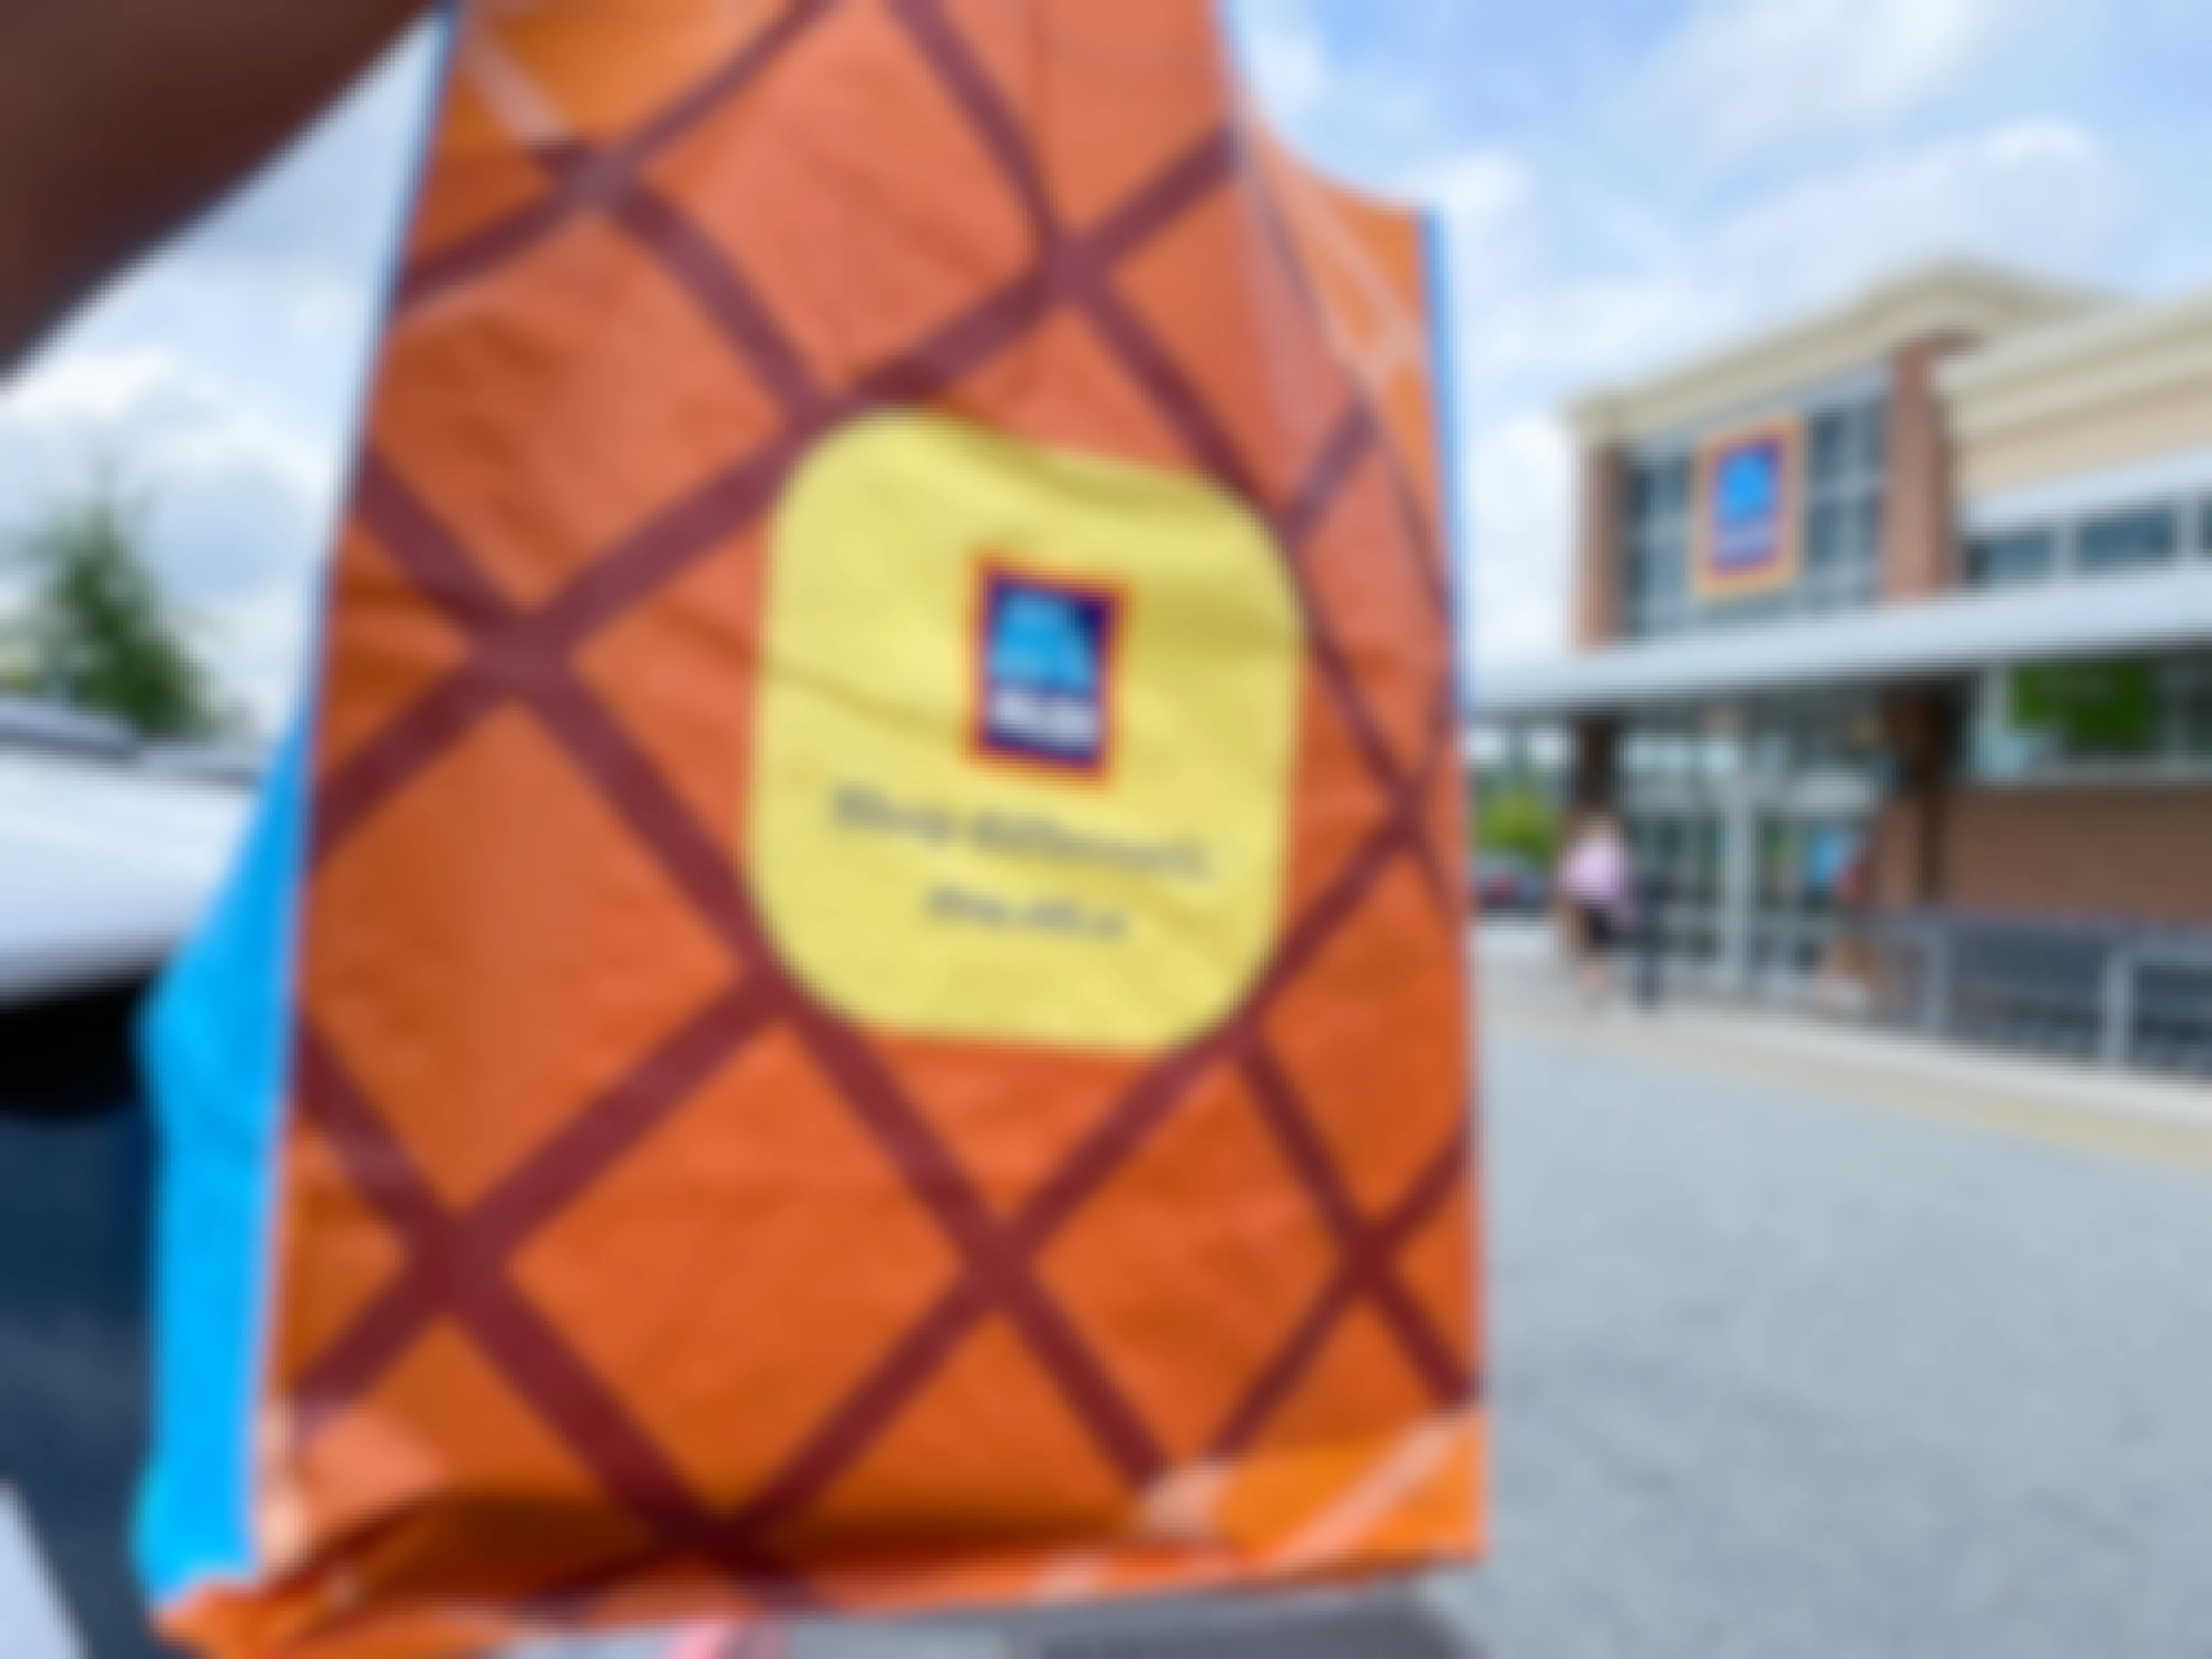 an Aldi reusable bag being held up in front of an Aldi store